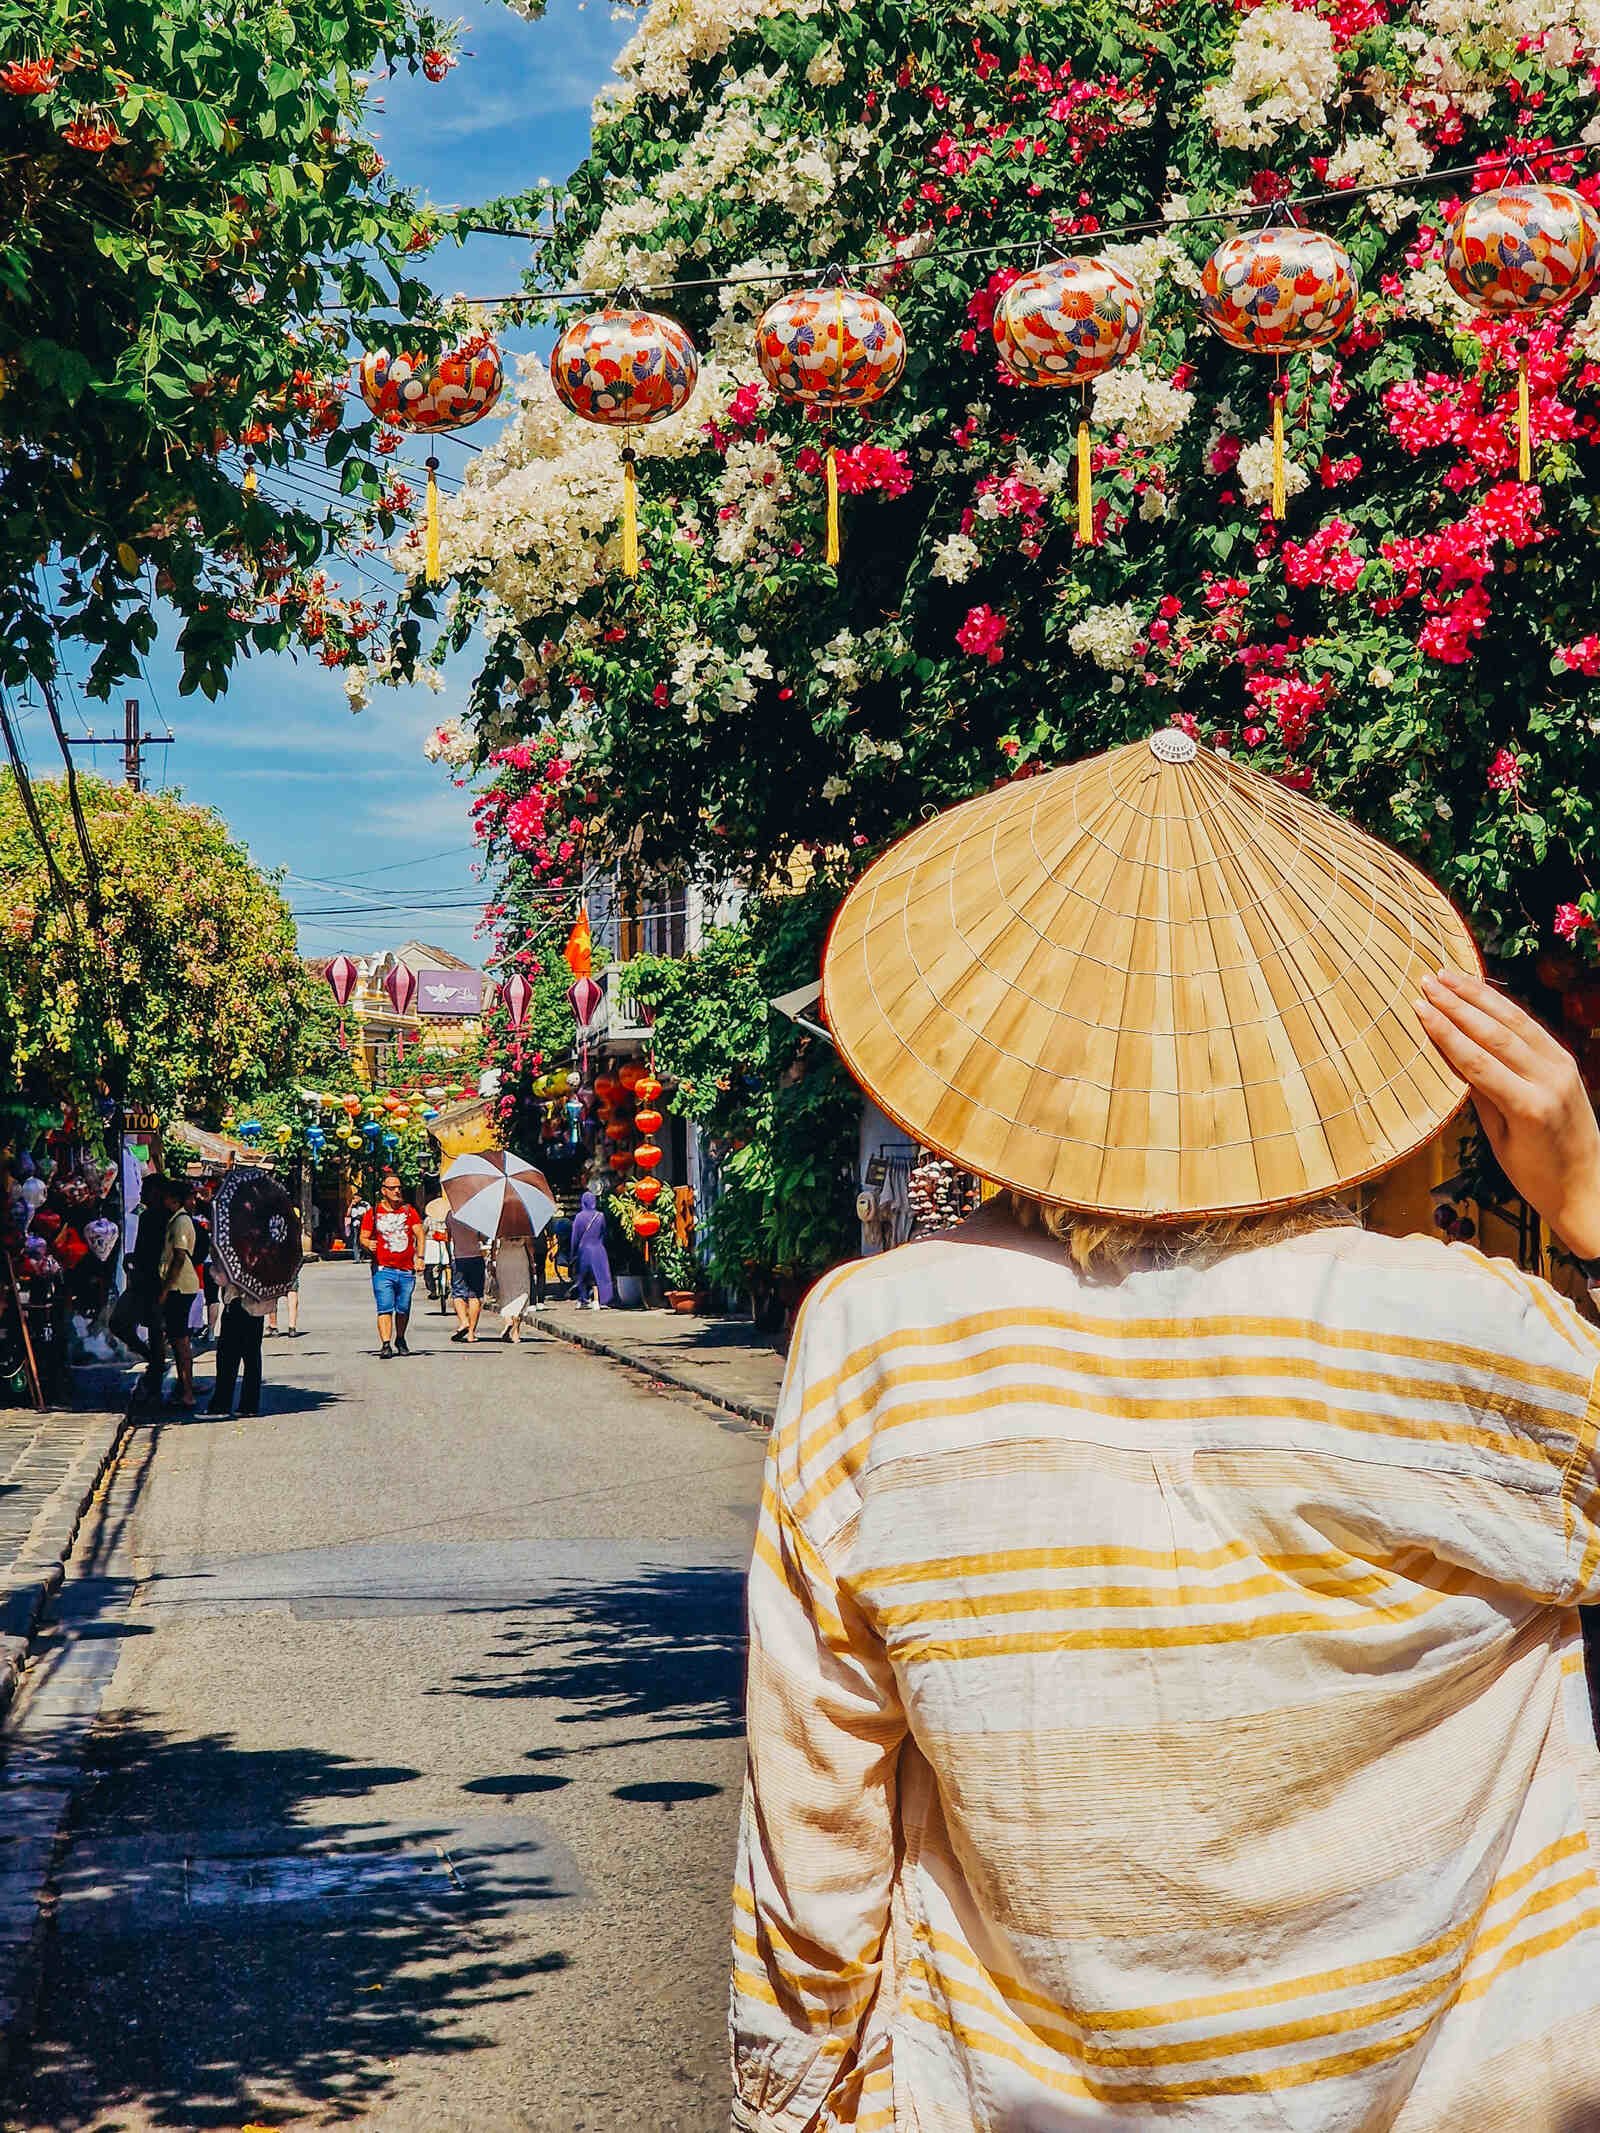 walking down the ancient streets of hoi an with lantern decorations